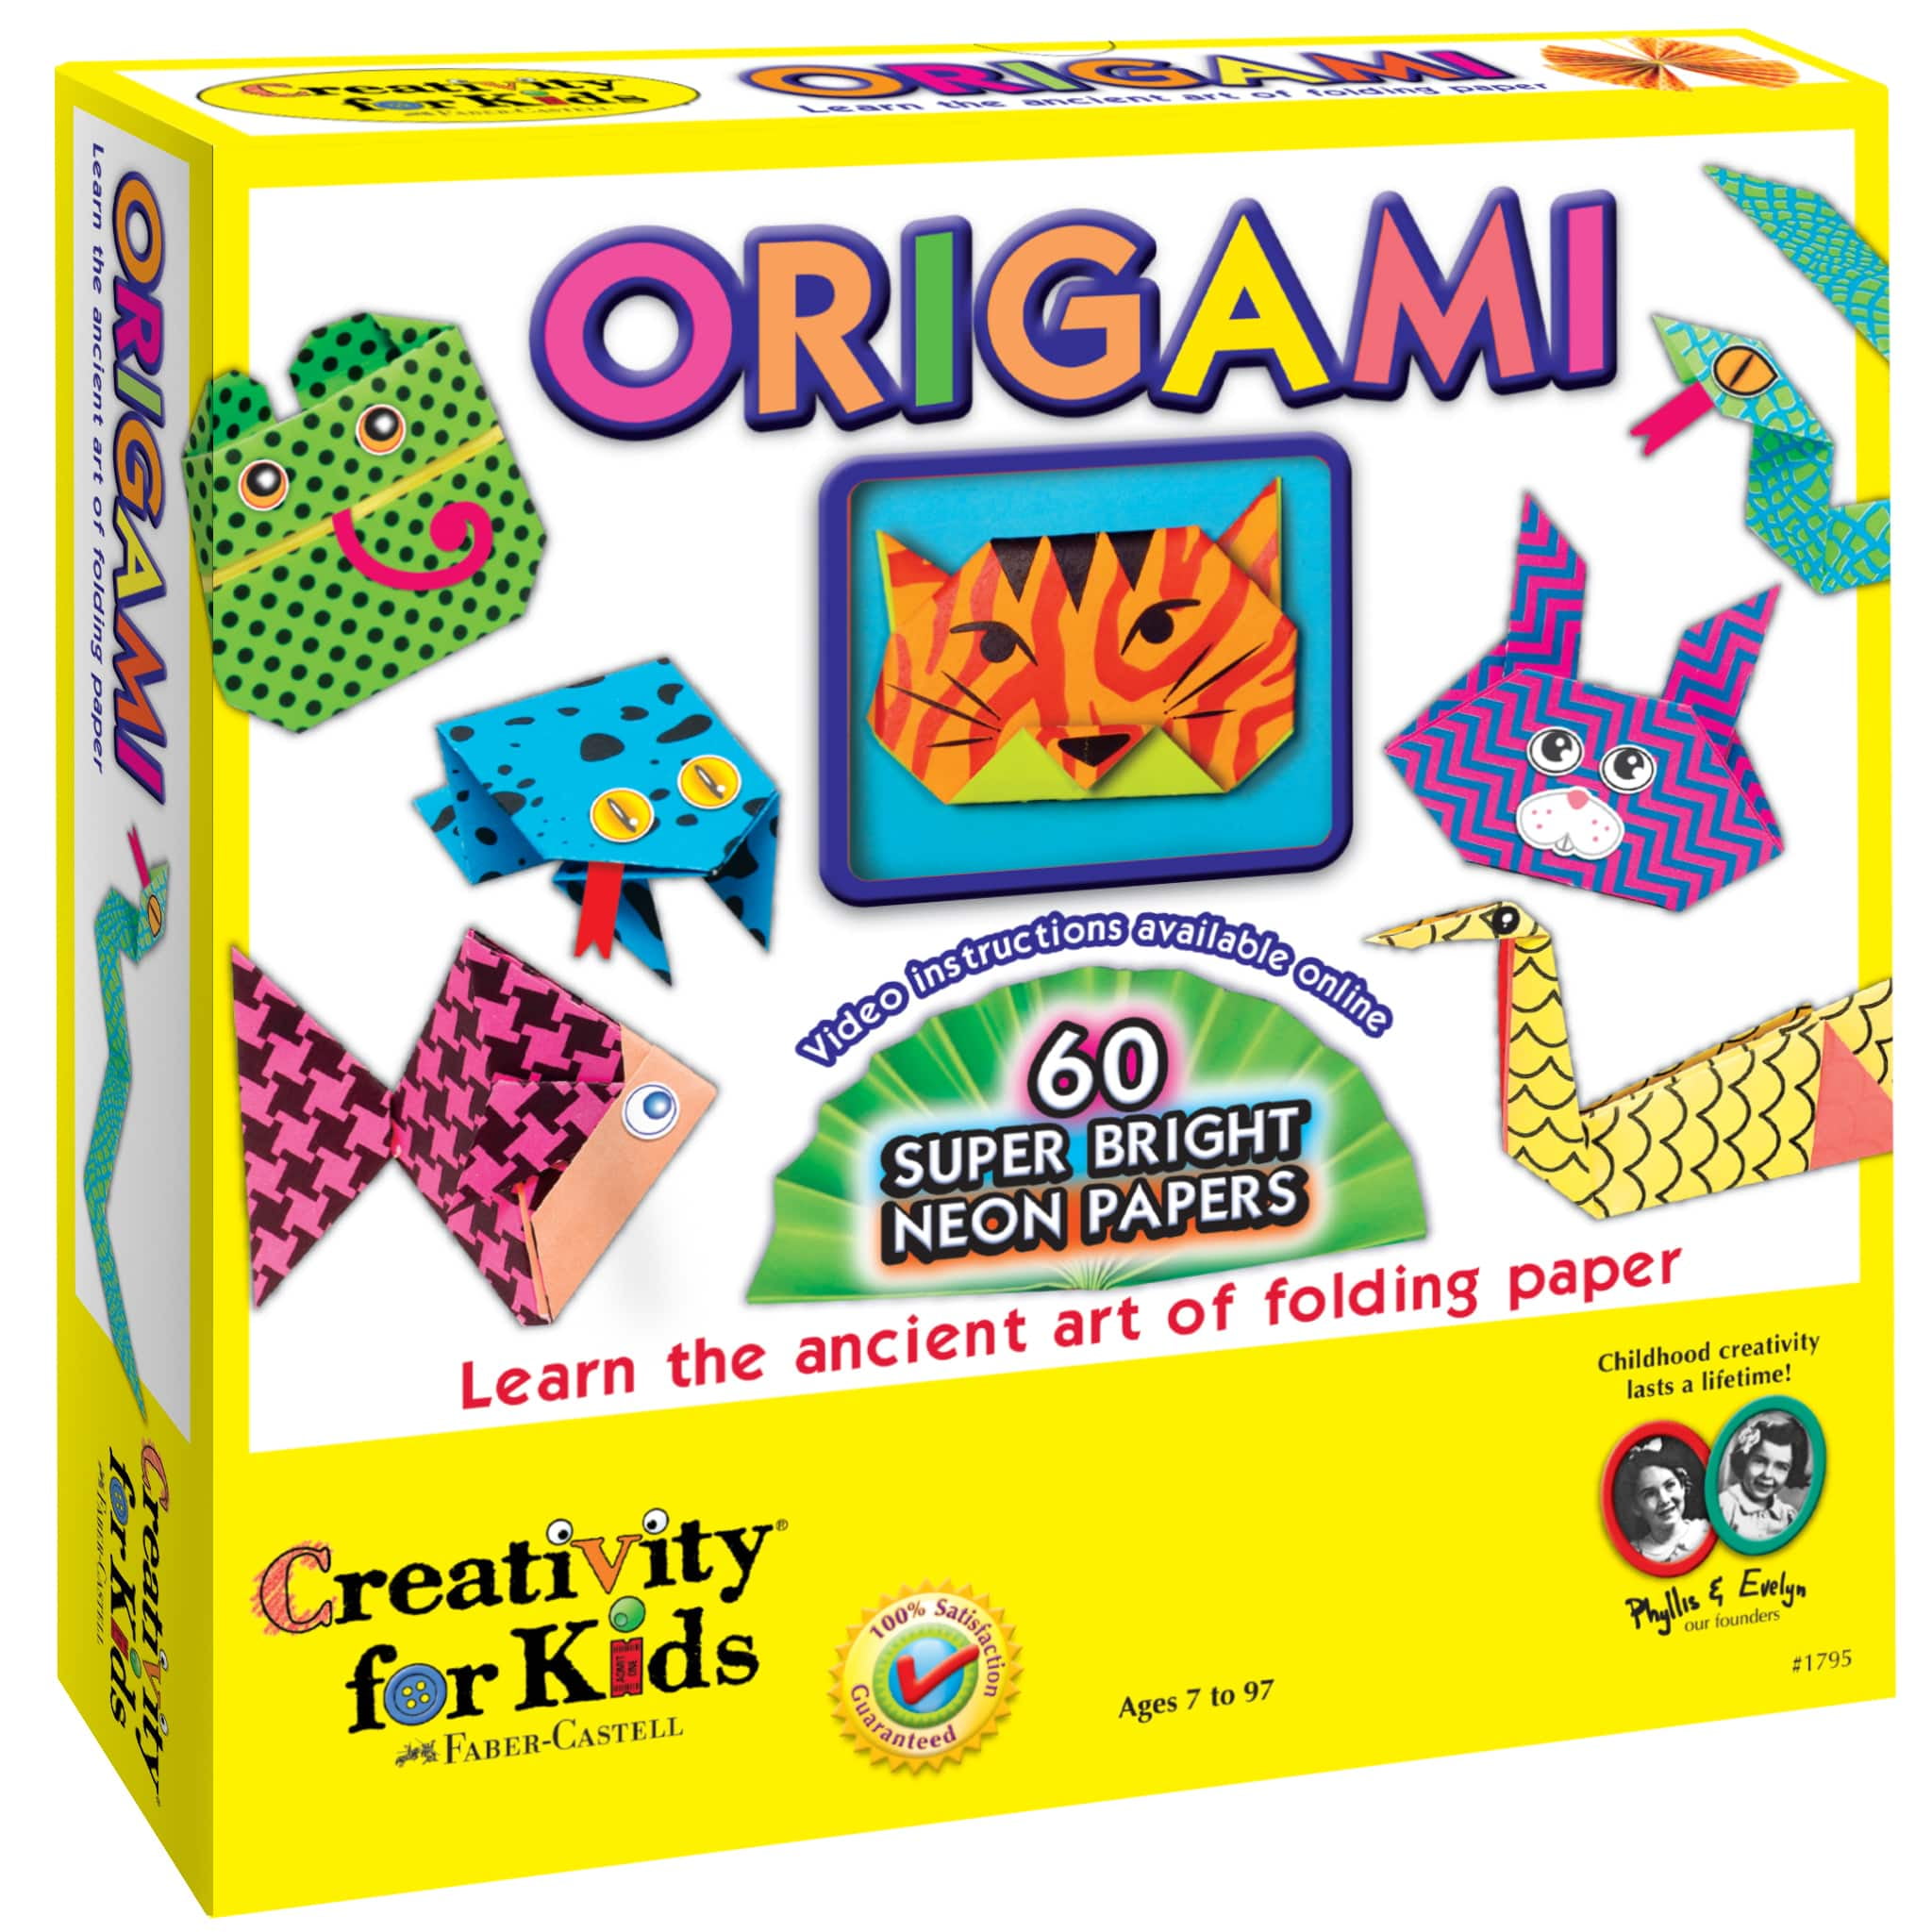 Factory Sealed Ancient Art of Origami Paper Kit - toys & games - by owner -  sale - craigslist